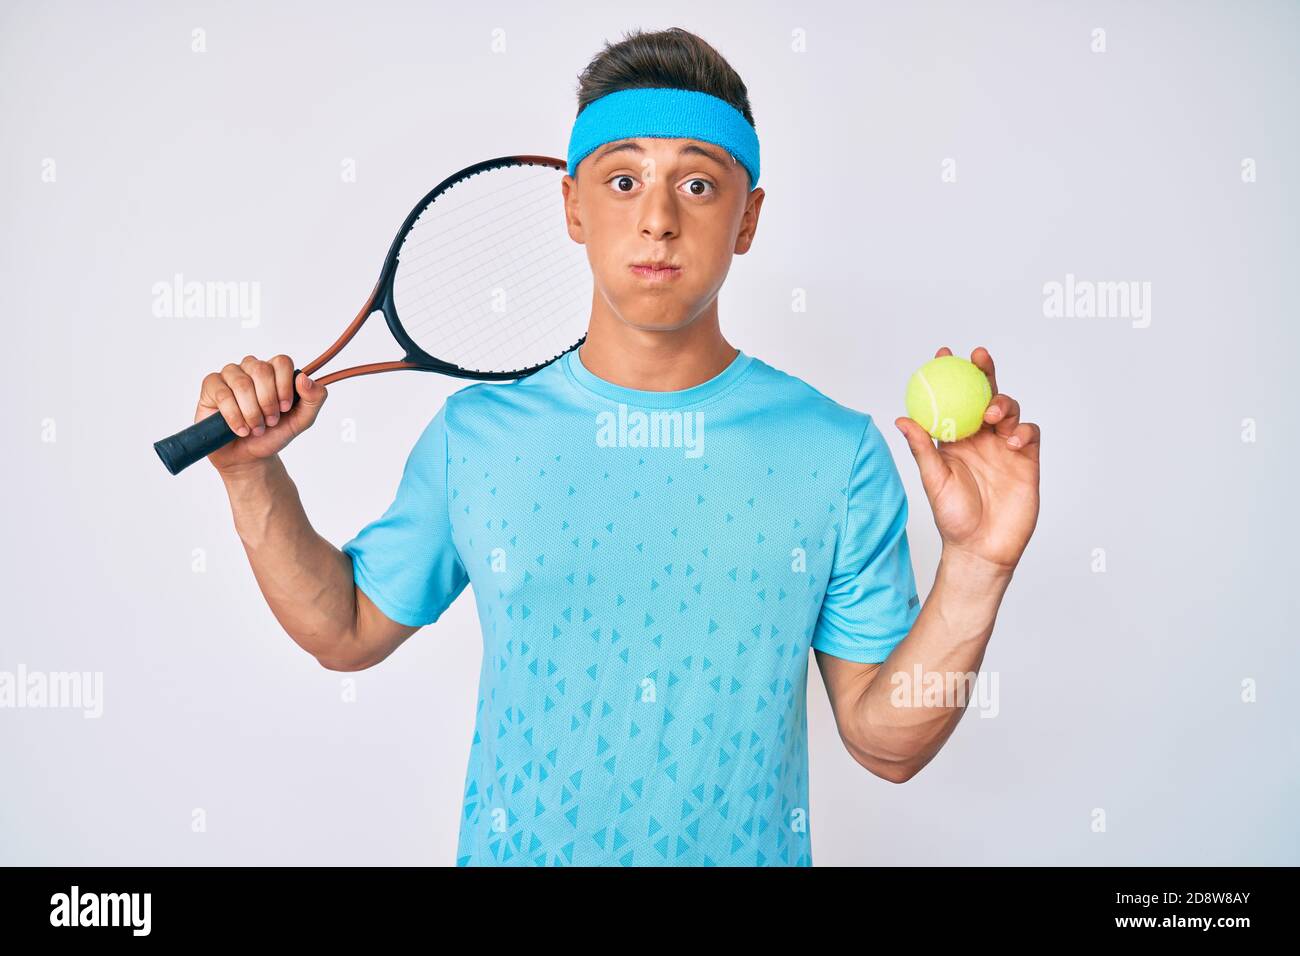 Page 4 Ball Boy Holding Tennis Ball High Resolution Stock Photography And Images Alamy